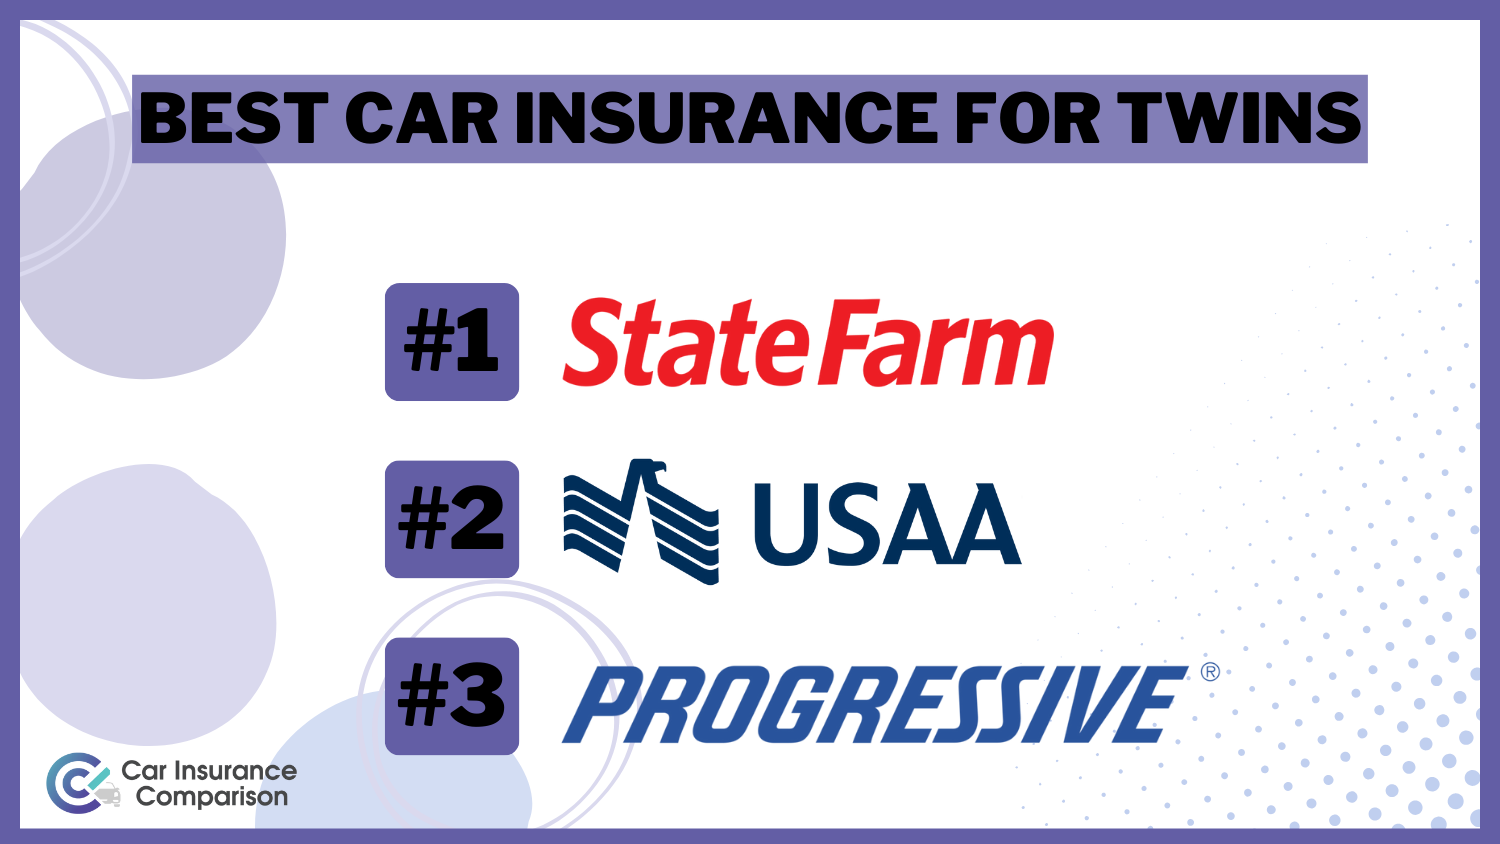 Best Car Insurance for Twins :State Farm, USAA, and Progressive